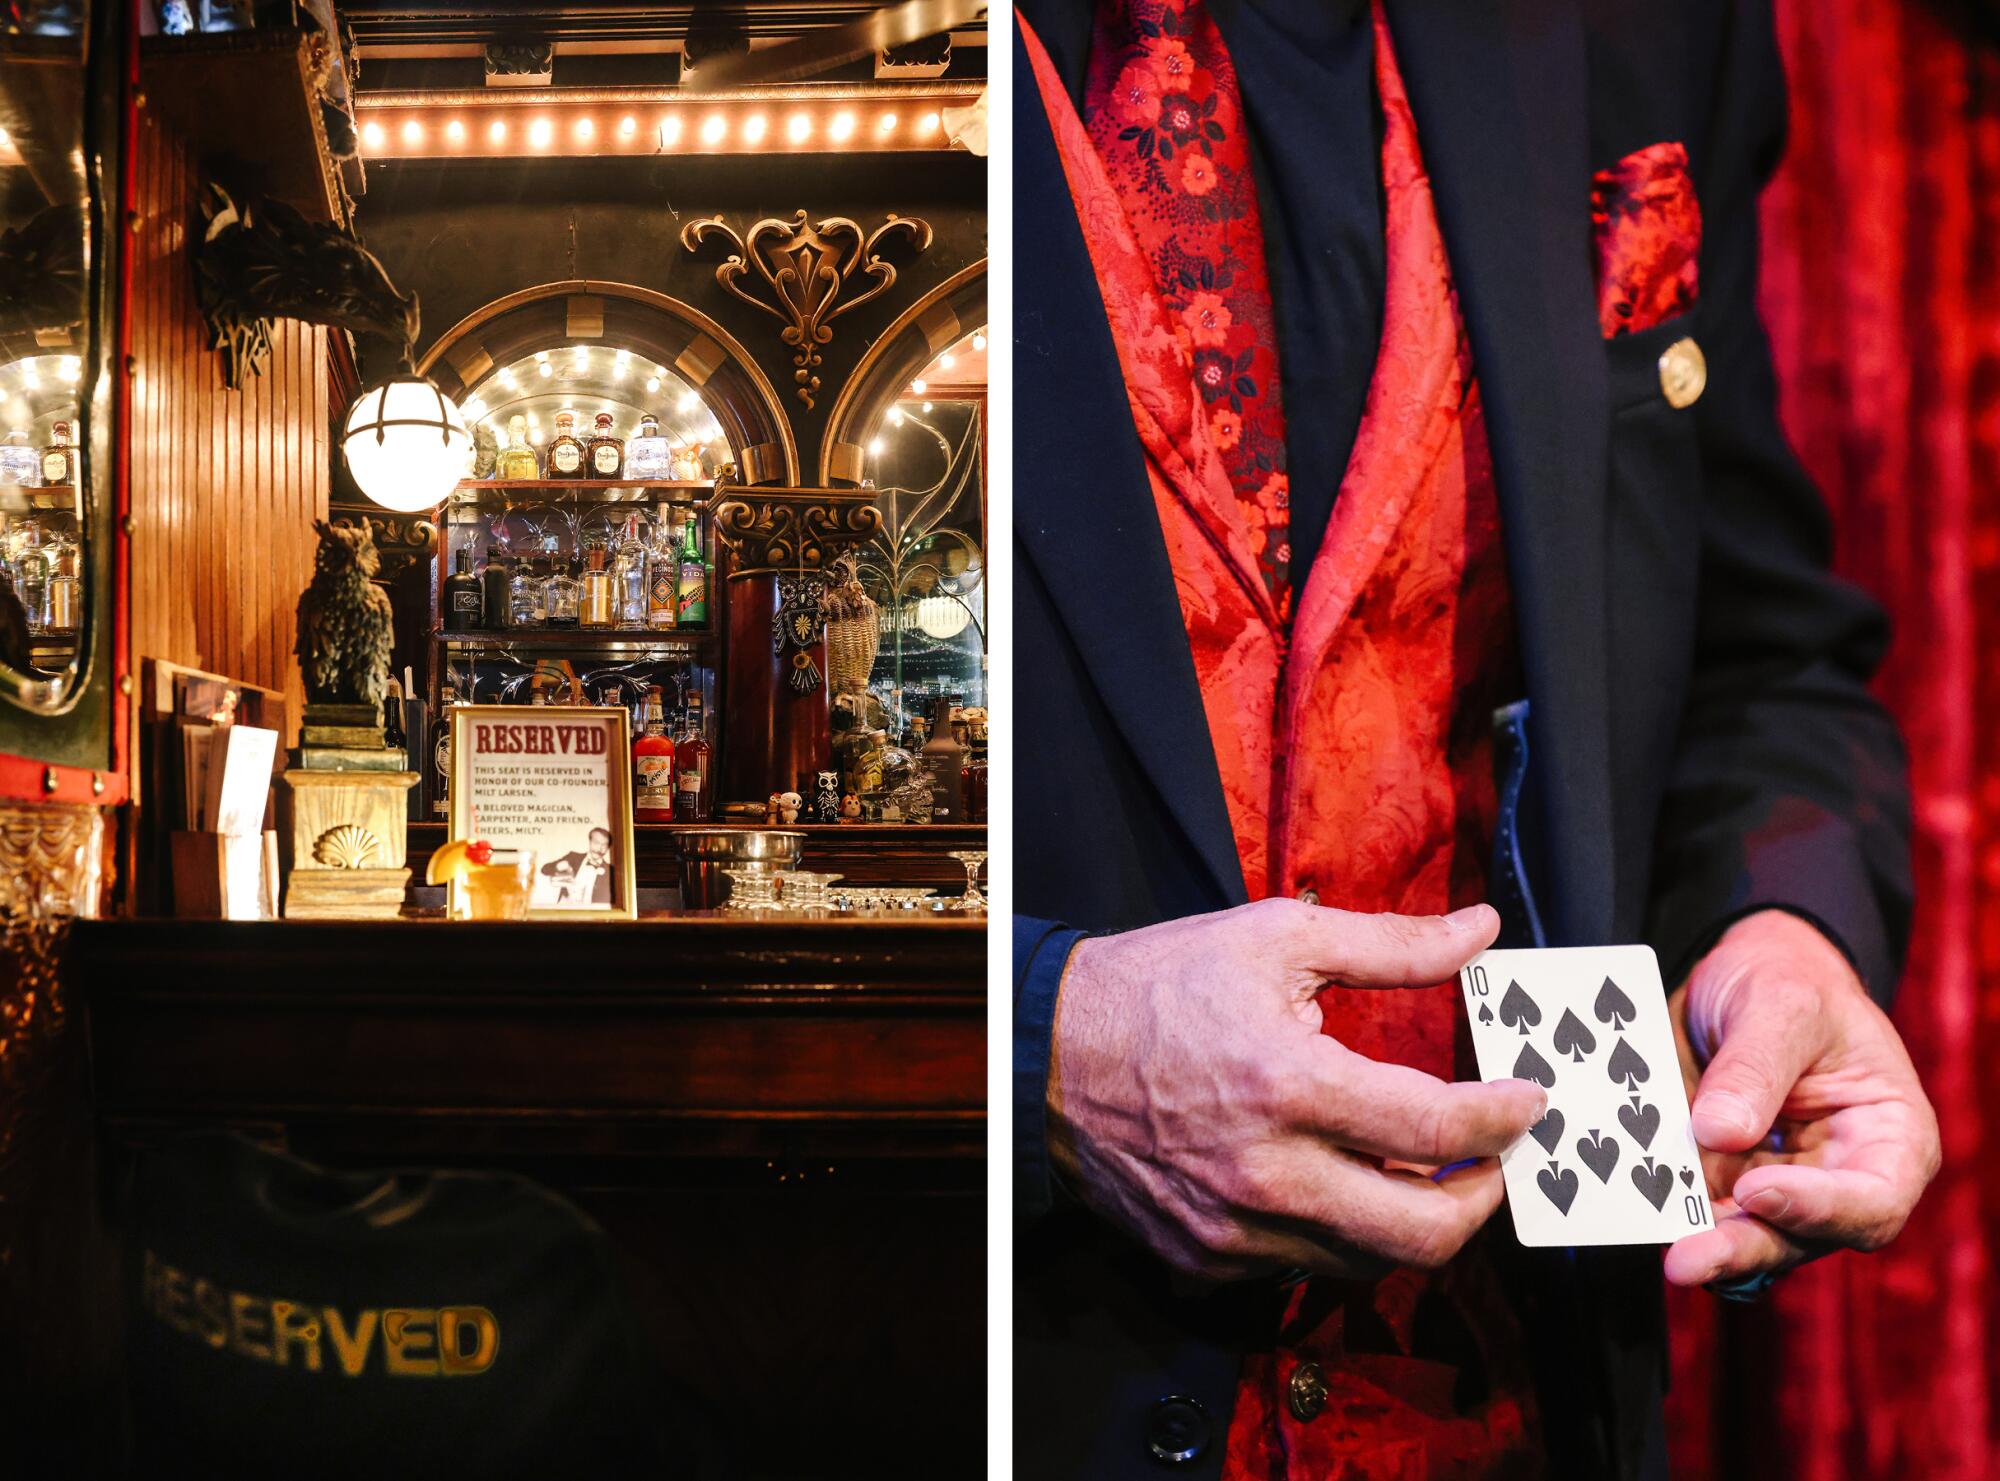 Two photos side by side, one of a bar with an empty chair, and one of hands displaying a playing card.